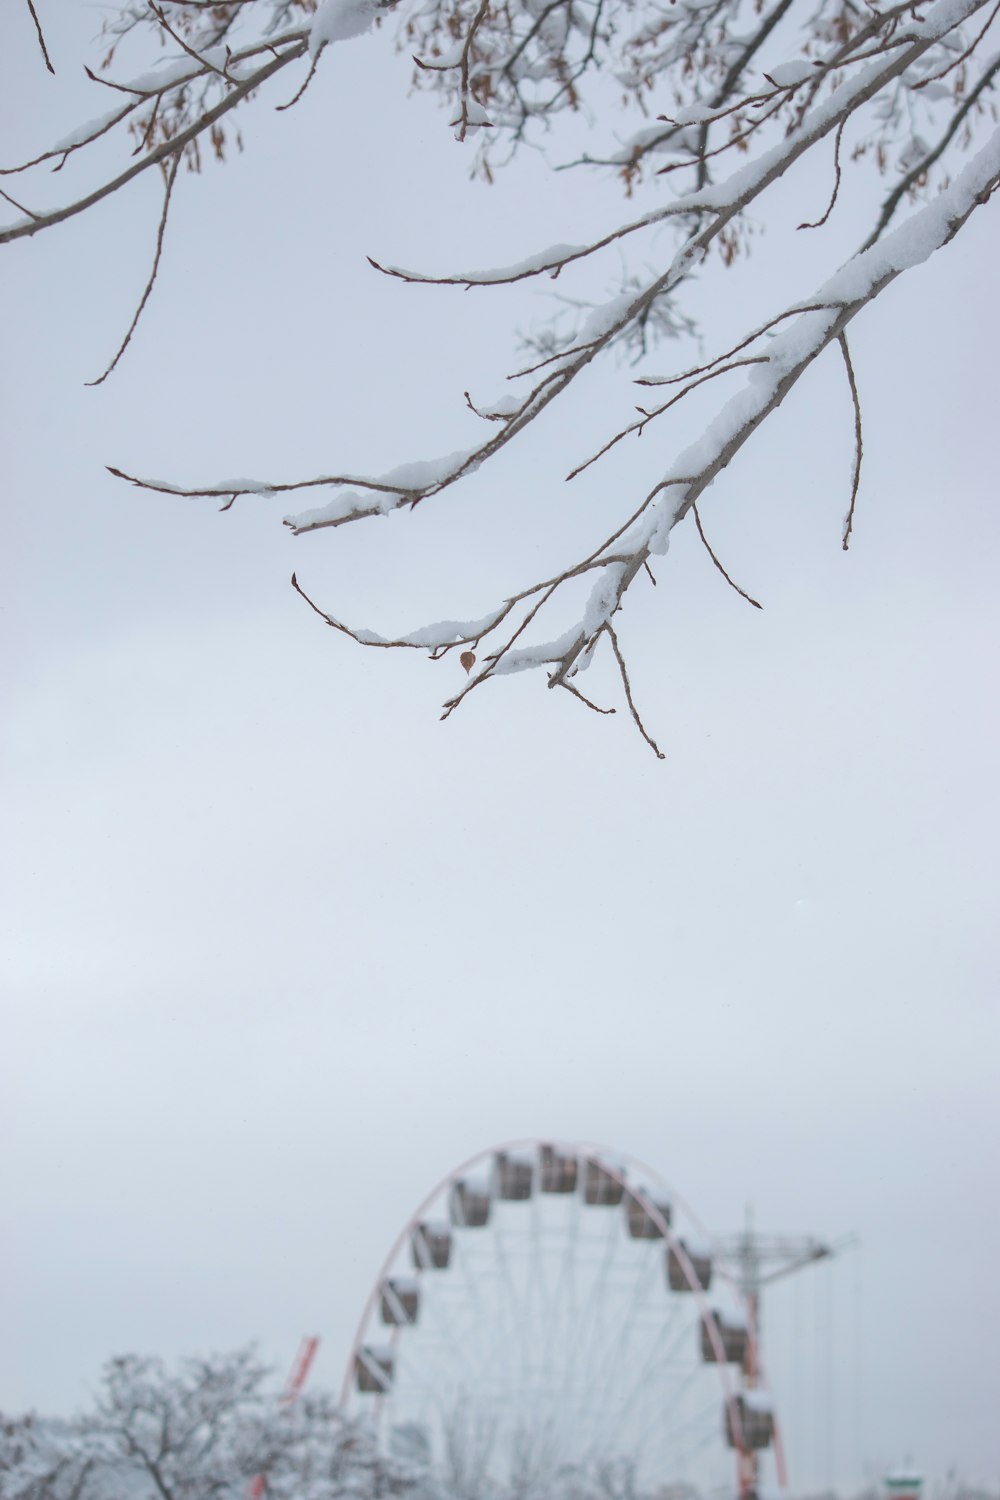 a ferris wheel in the distance with snow on the ground